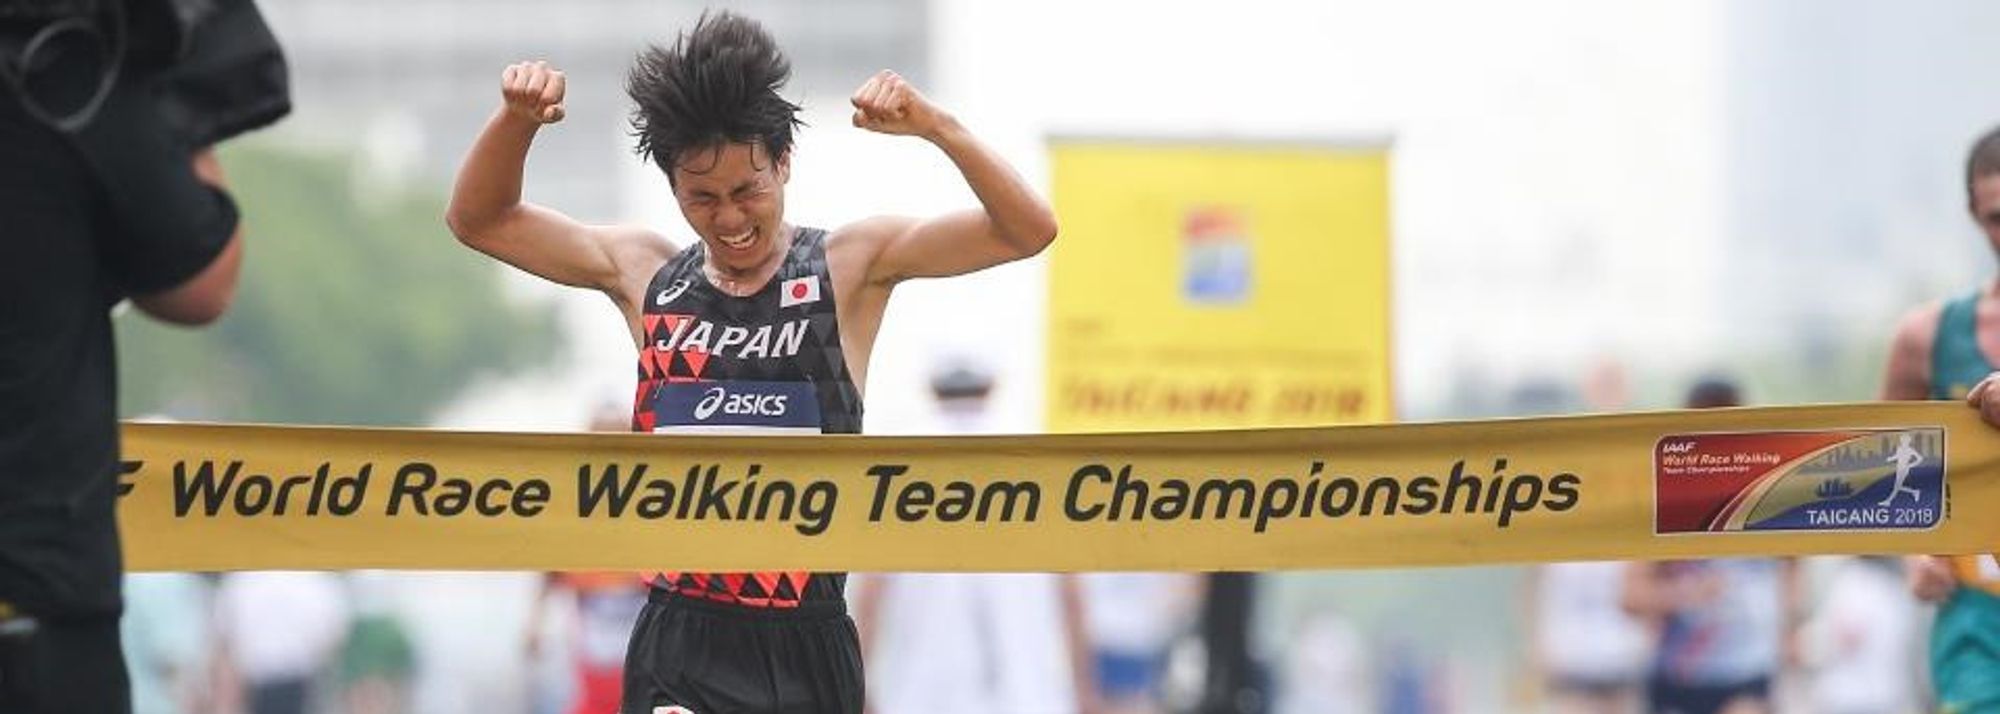 The IAAF World Race Walking Team Championships Taicang 2018 reached an exciting climax as Koki Ikeda led Japan to double gold in the men’s 20km race walk.